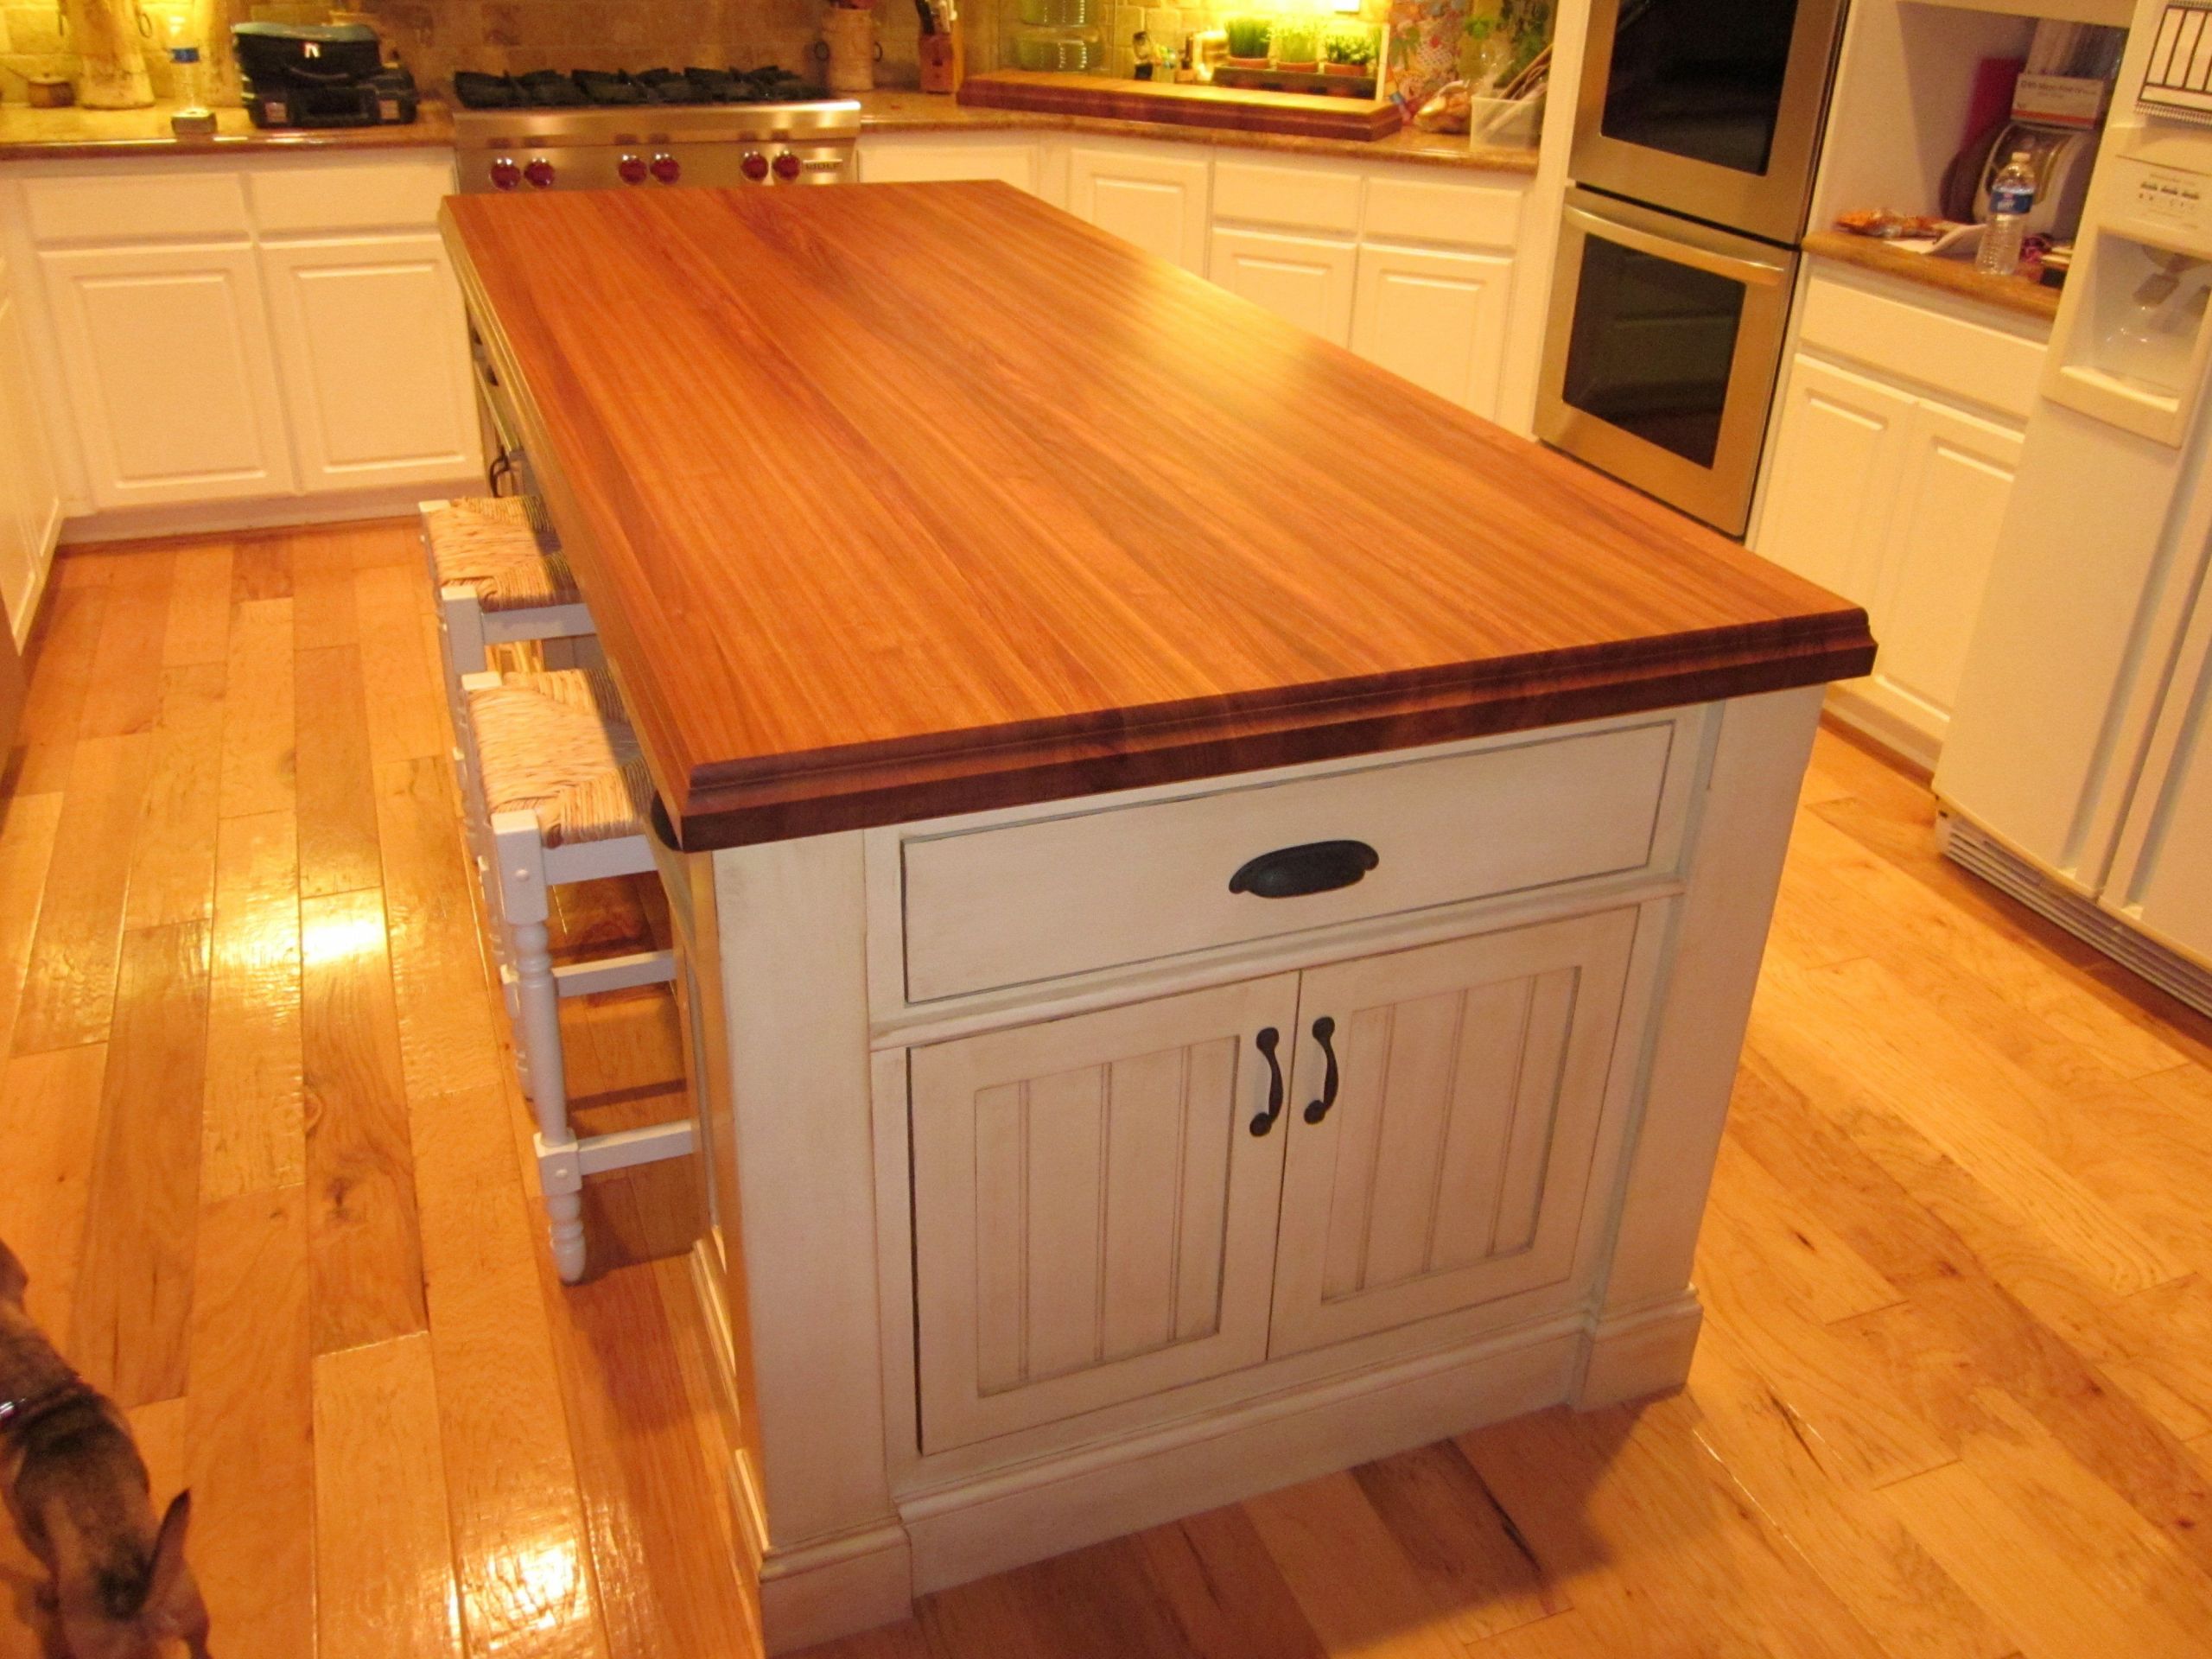 Wood Kitchen Counters
 All About Wood Kitchen Countertops You Have to Know